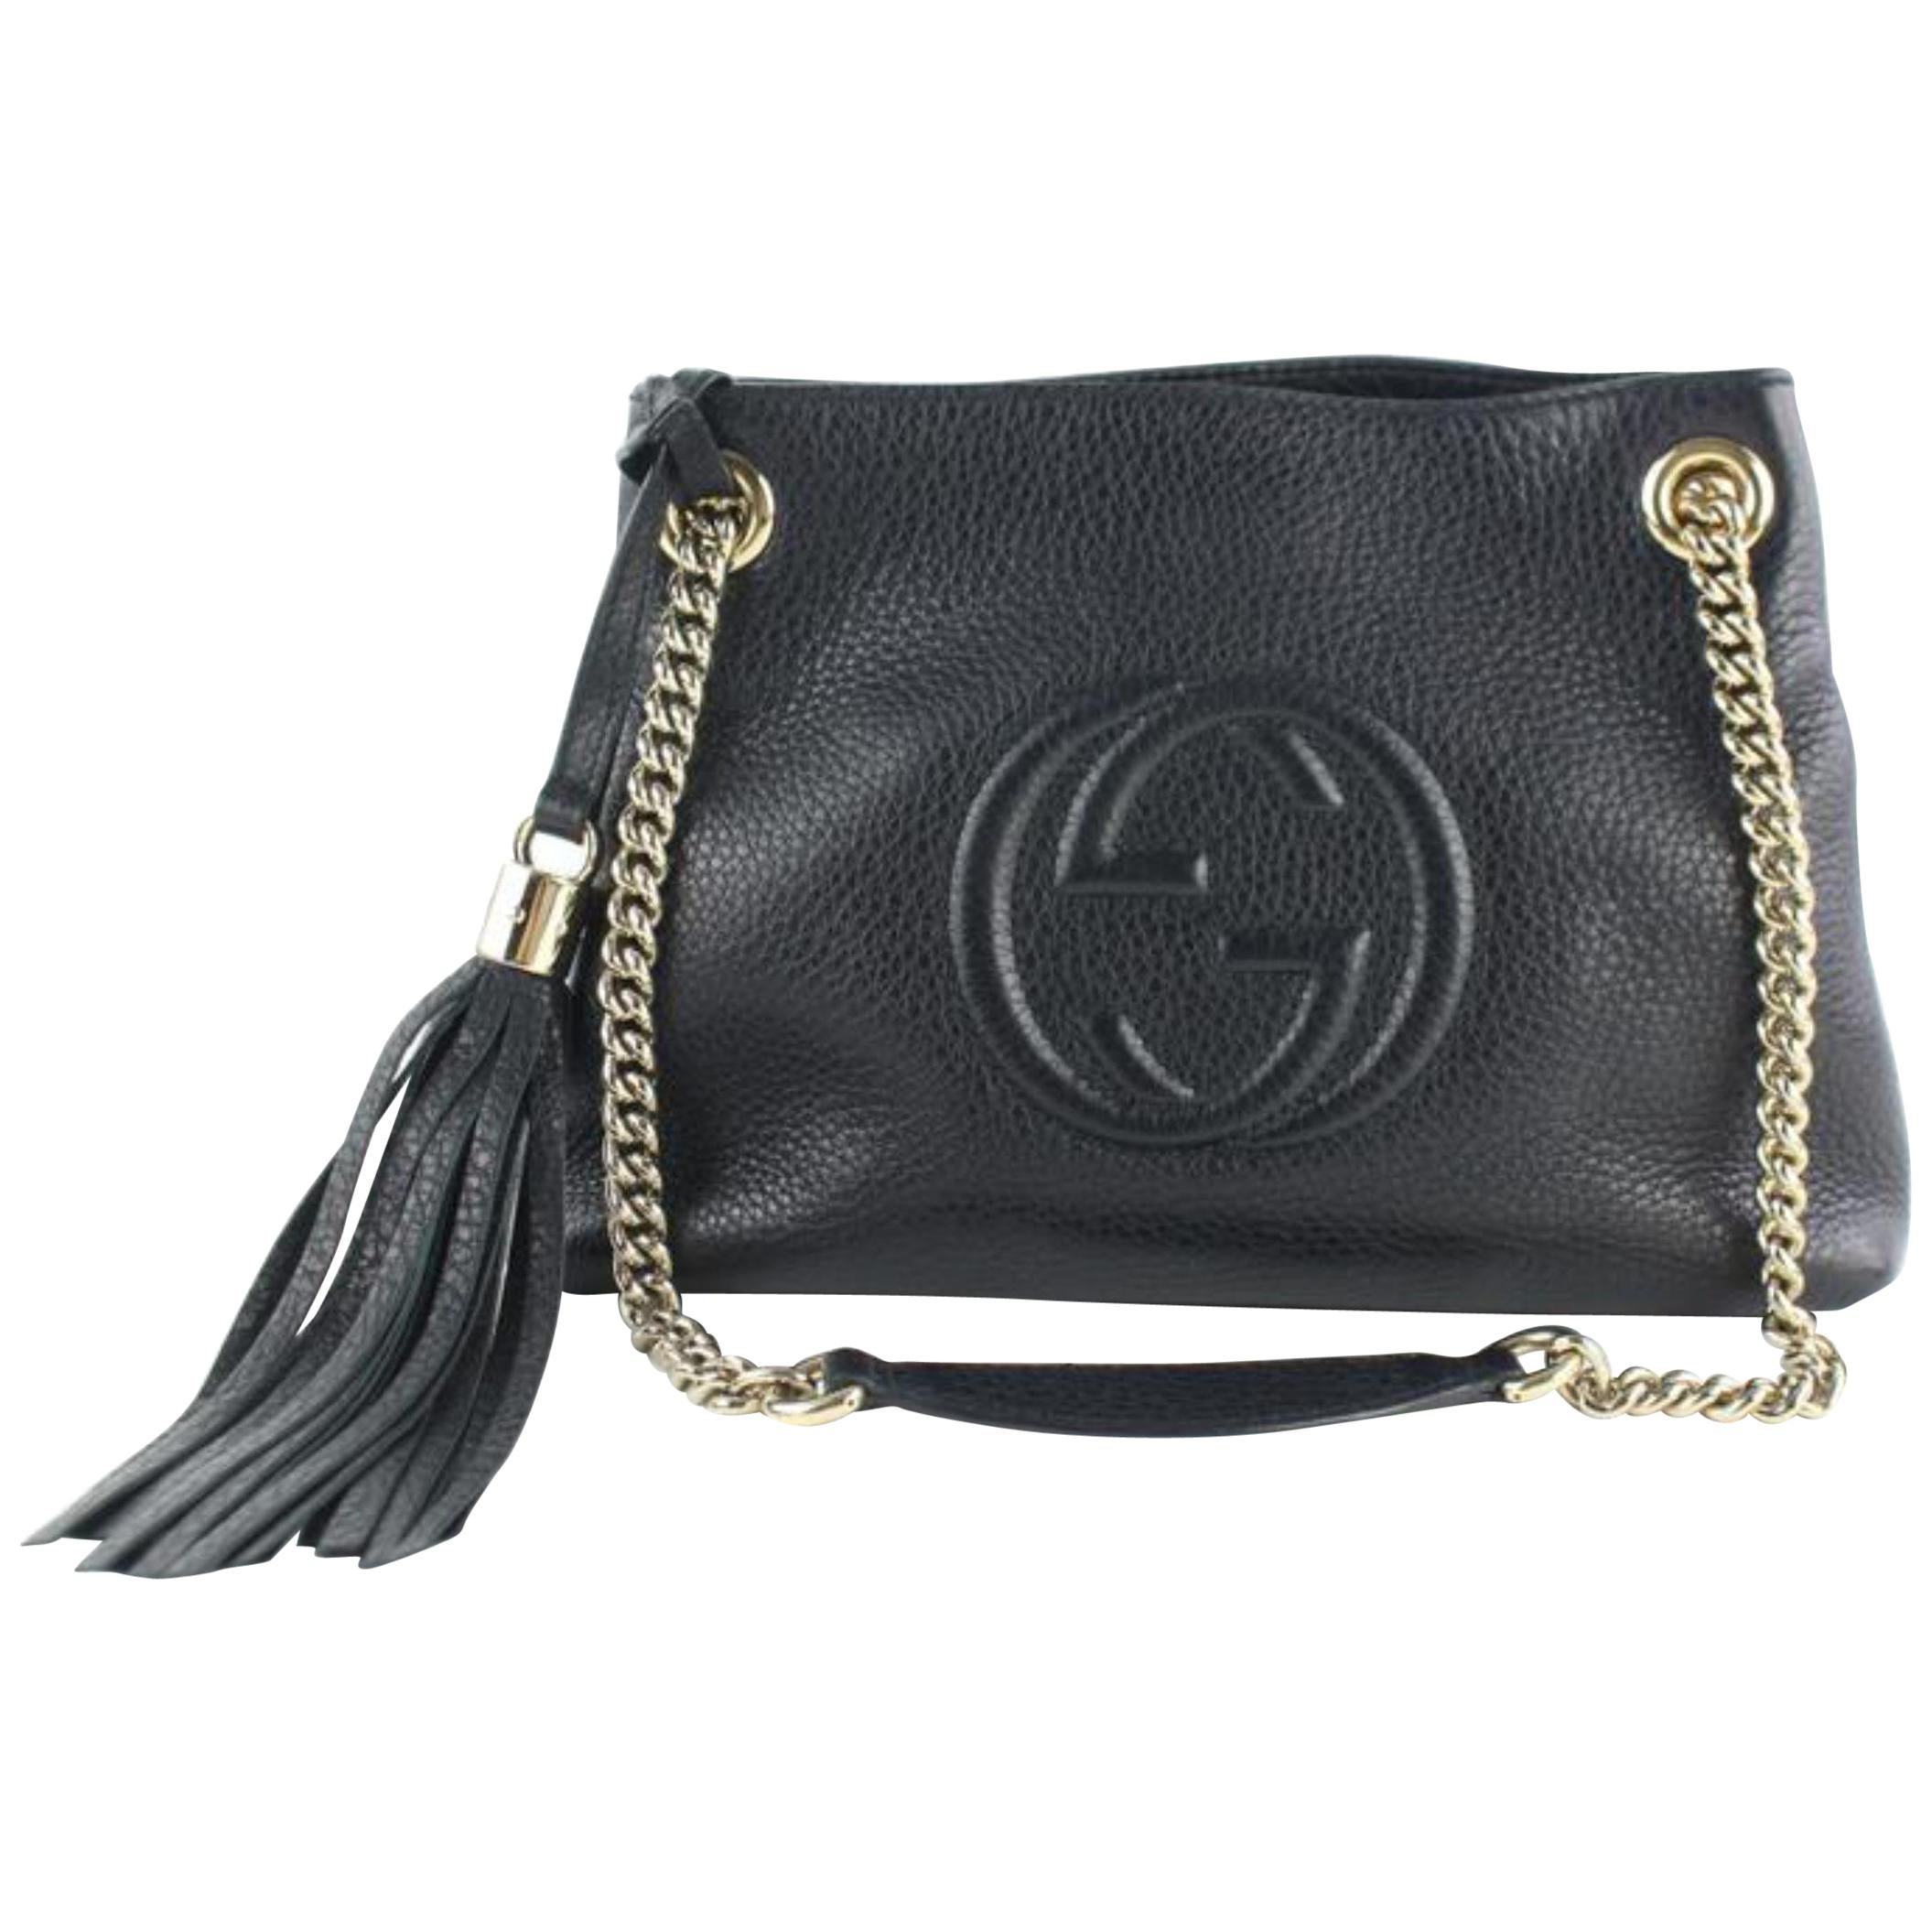 Gucci Soho (Ultra Rare) Chaint Tote 7gz1217 Black Leather Cross Body Bag For Sale